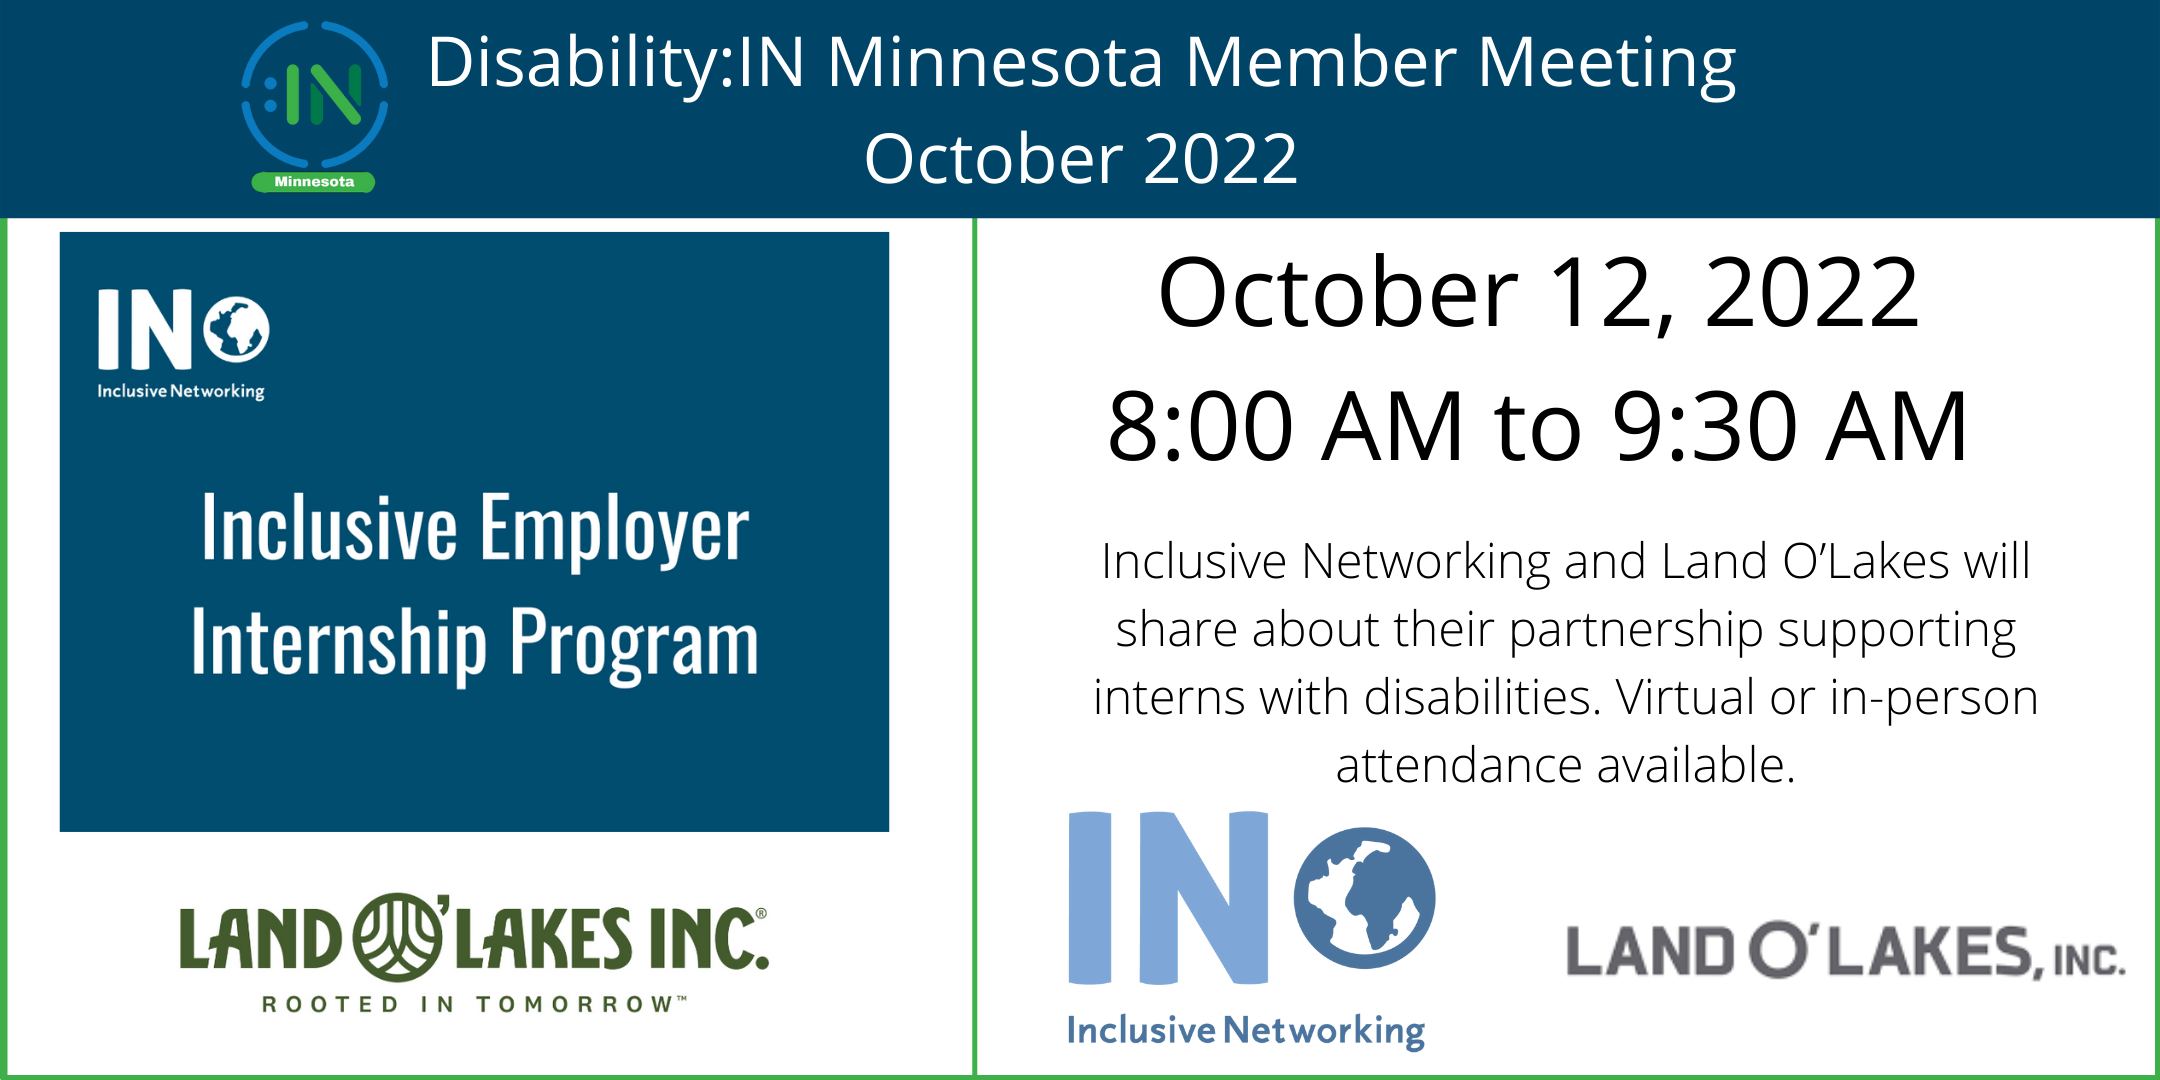 An invitation to the Disability:IN Minnesota Member Meeting for October 2022. Inclusive Networking and Land O’Lakes will share about their partnership supporting interns with disabilities. Virtual or in-person attendance available. October 12, 2022 from 8 AM to 9:30 AM. On the left side is a graphic with text Inclusive Employer Internship Program. Logos for Disability:IN Minnesota, Land O’Lakes, and Inclusive Networking are included.